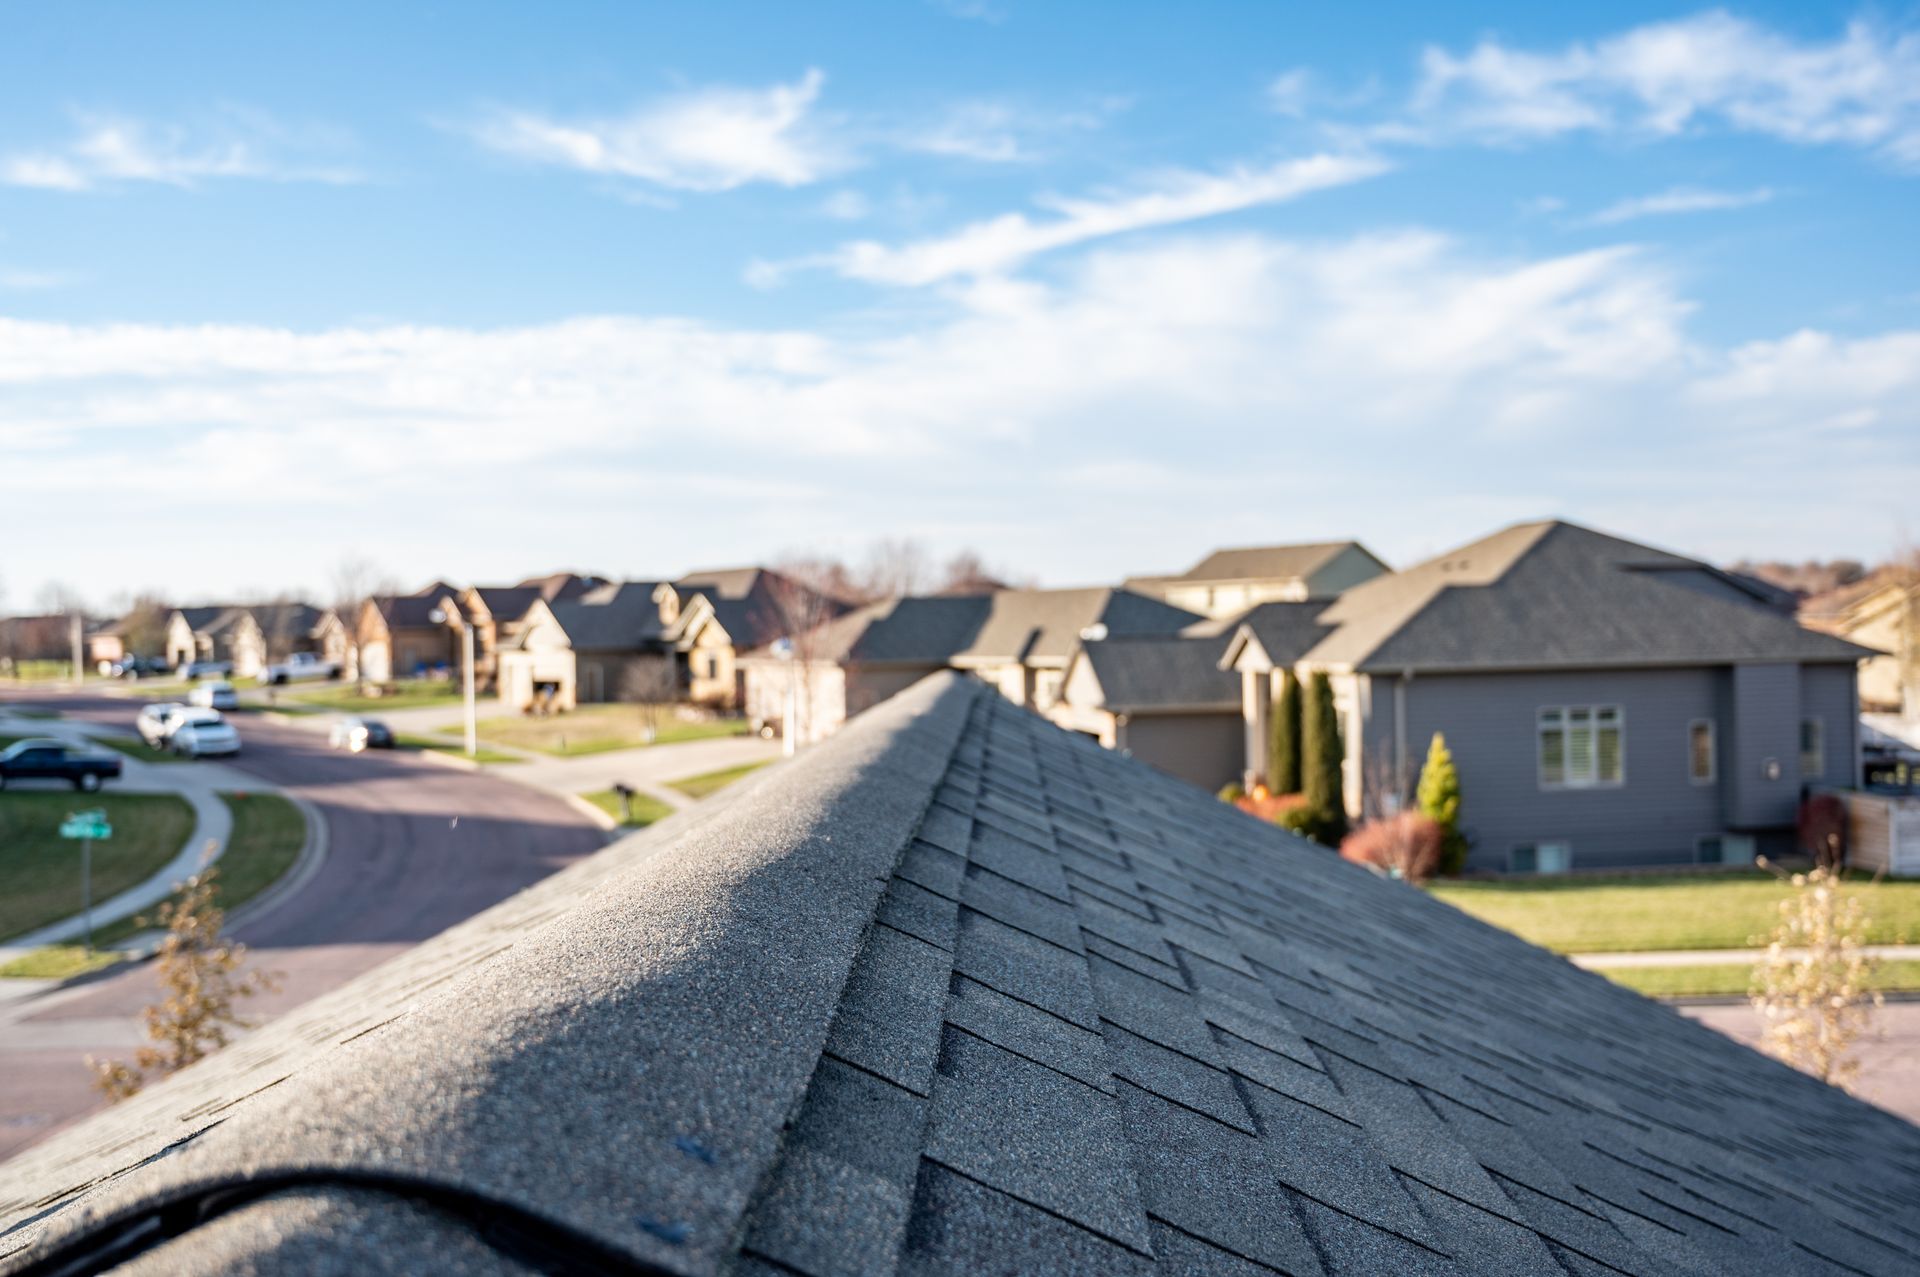 Baton Rouge Roofing: Maximizing your Home's Resale Value with a Well-maintained Roof